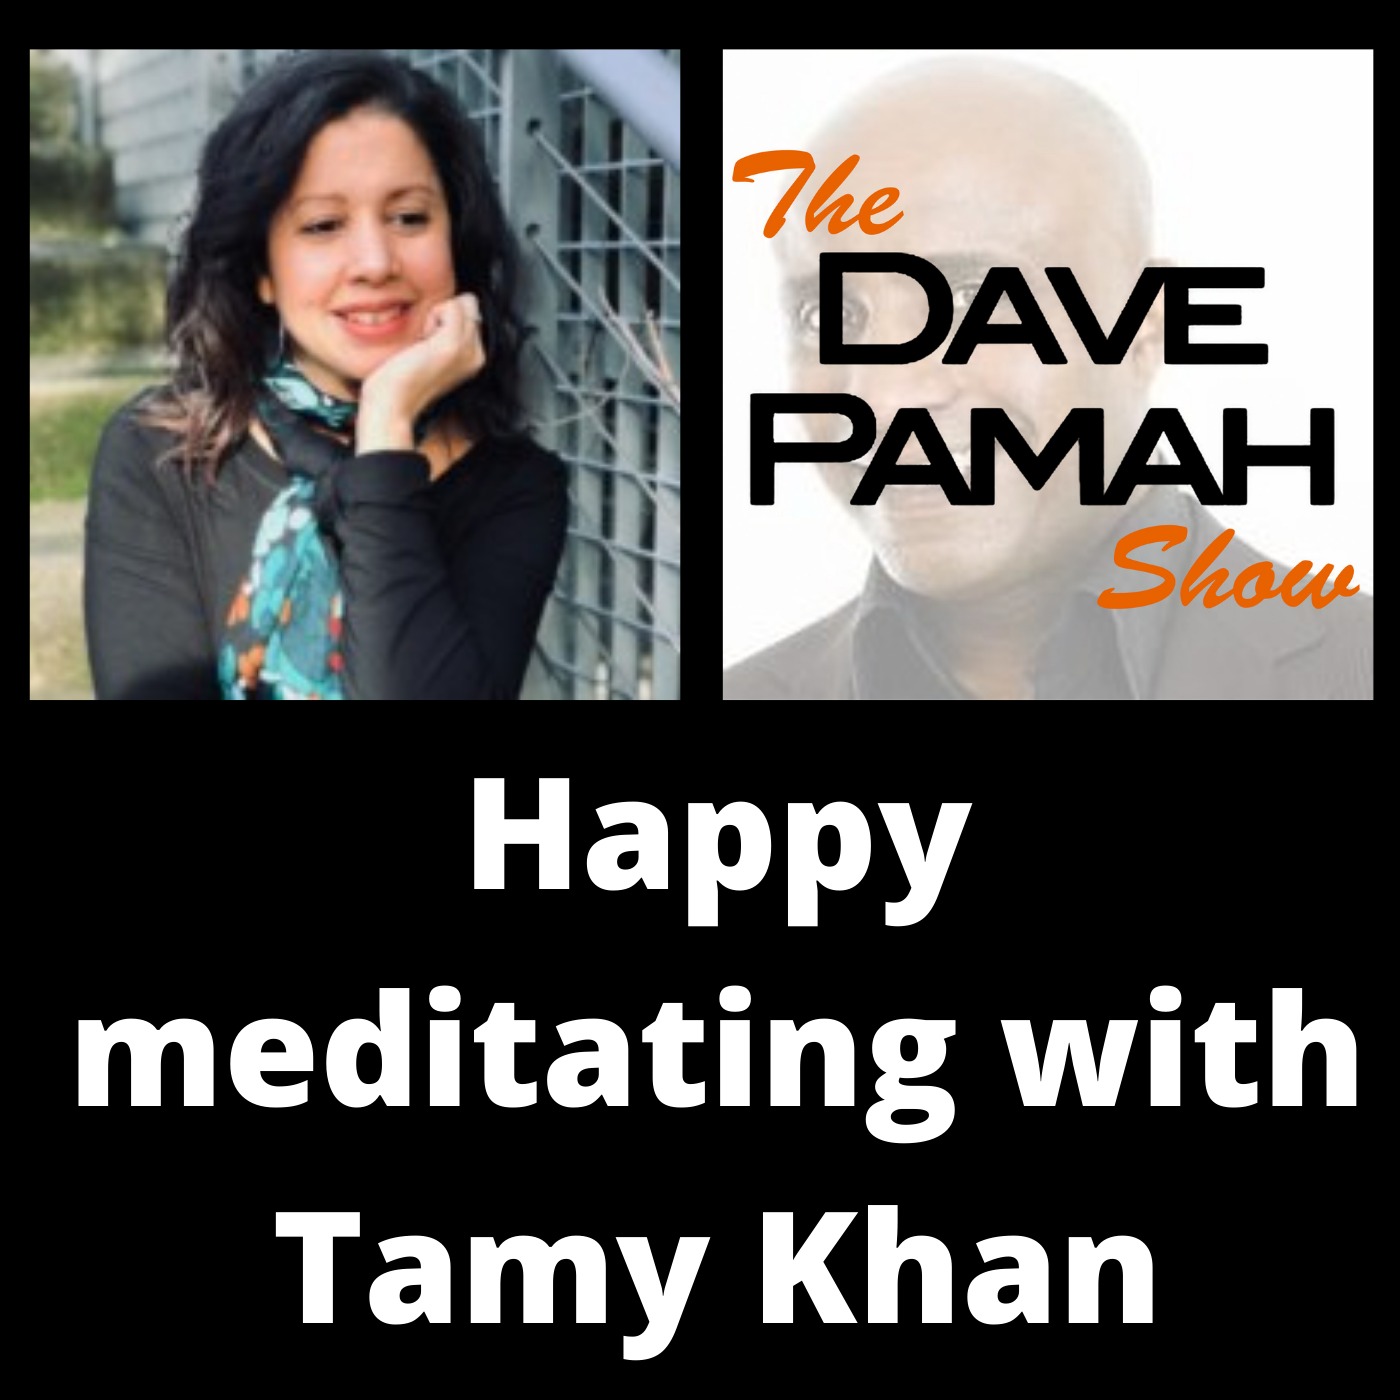 Happy meditating with Tamy Khan